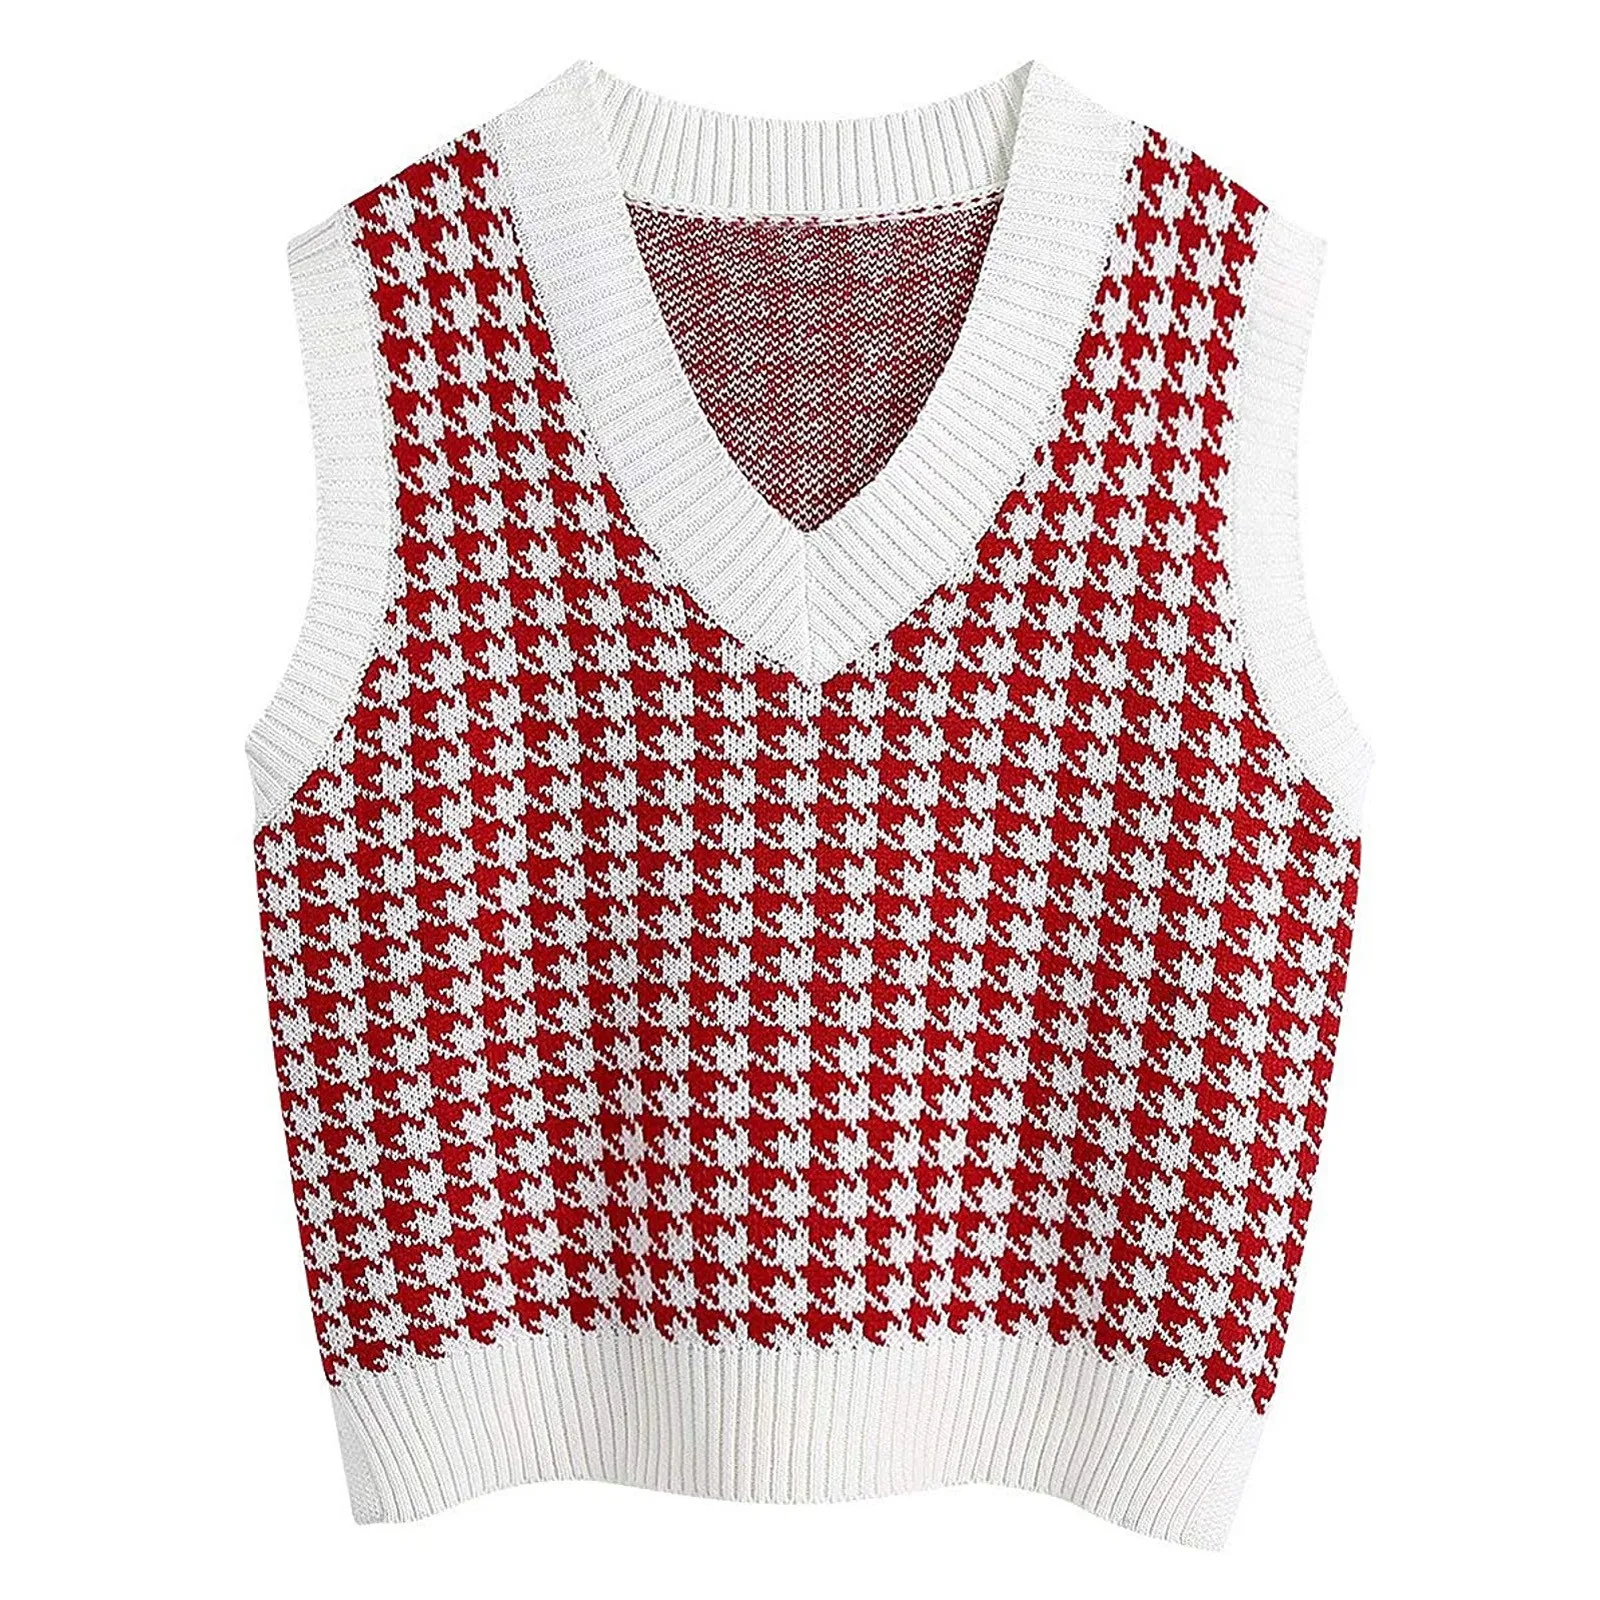 

Women'S Vest Casual V-Neck Pullover Shirt Collision Color Sleeveless Female Sweater Lattice Knitted Short Sweater Vest Autumn